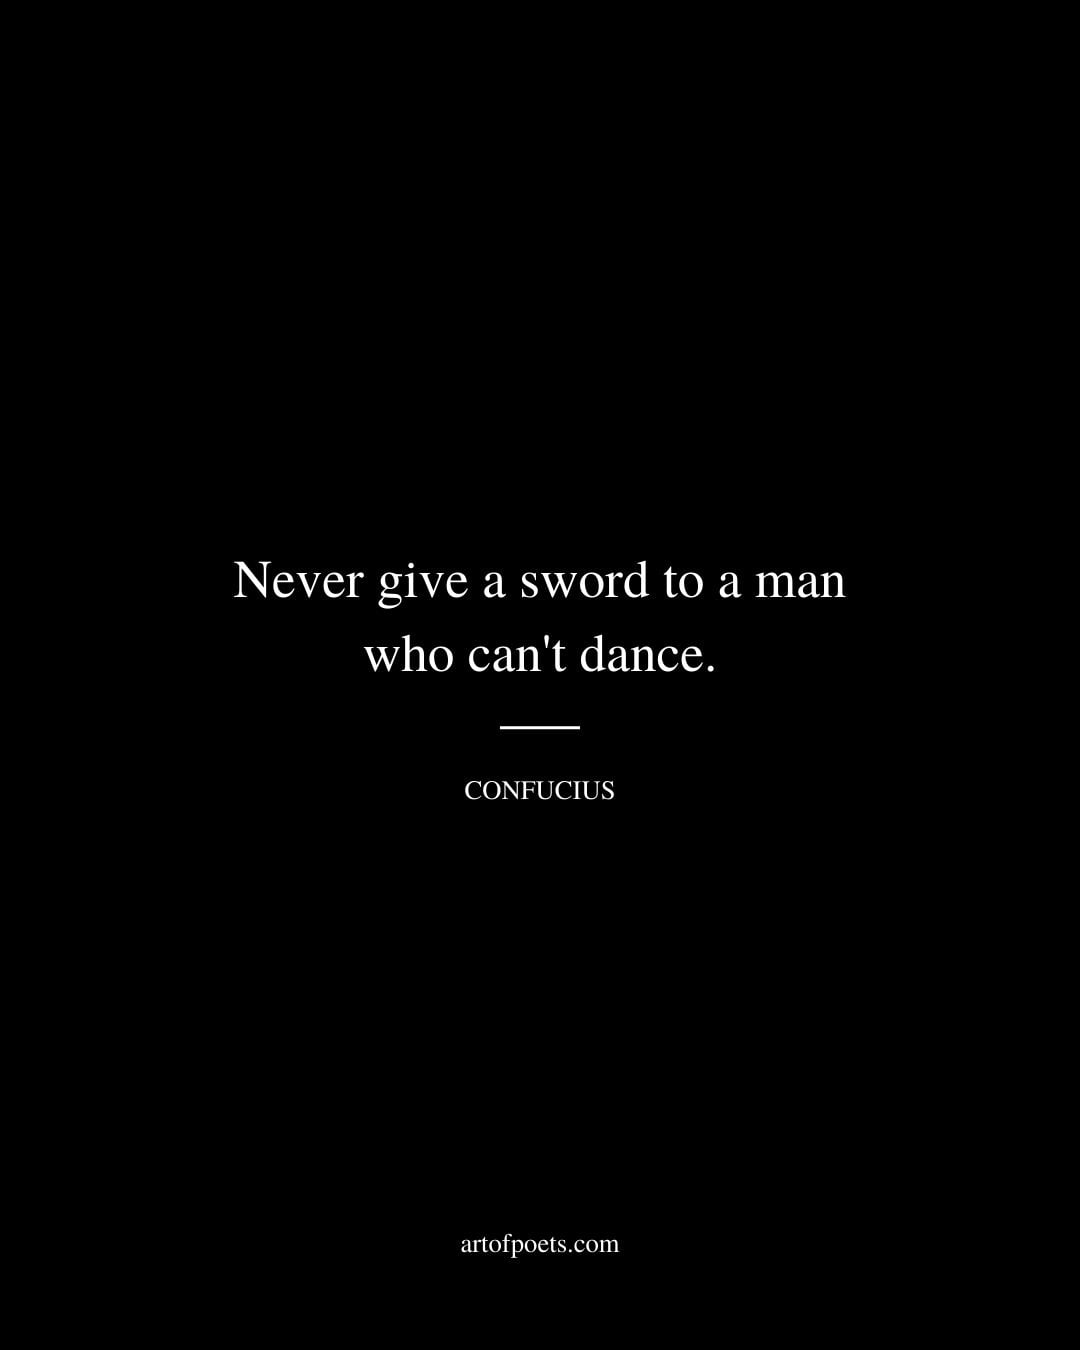 Never give a sword to a man who cant dance